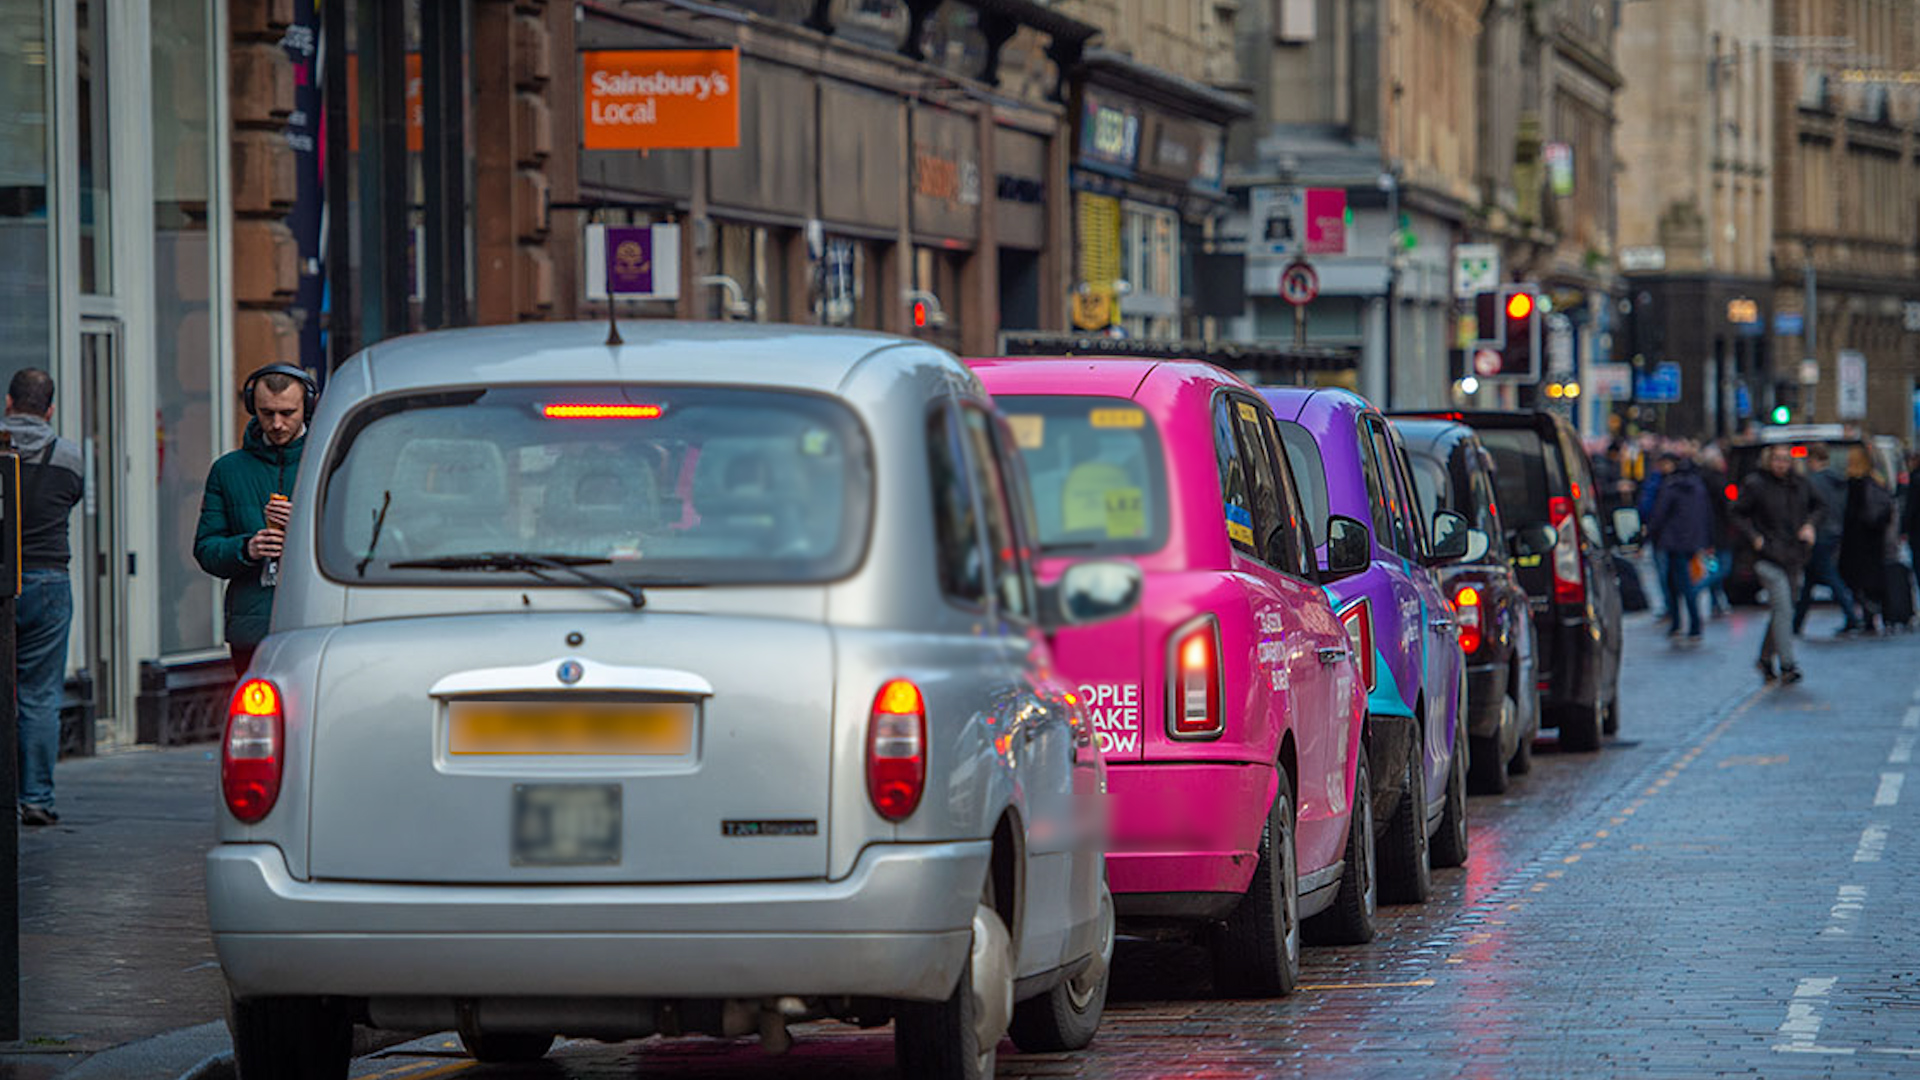 Taxis waiting outside Glasgow Central railway station.